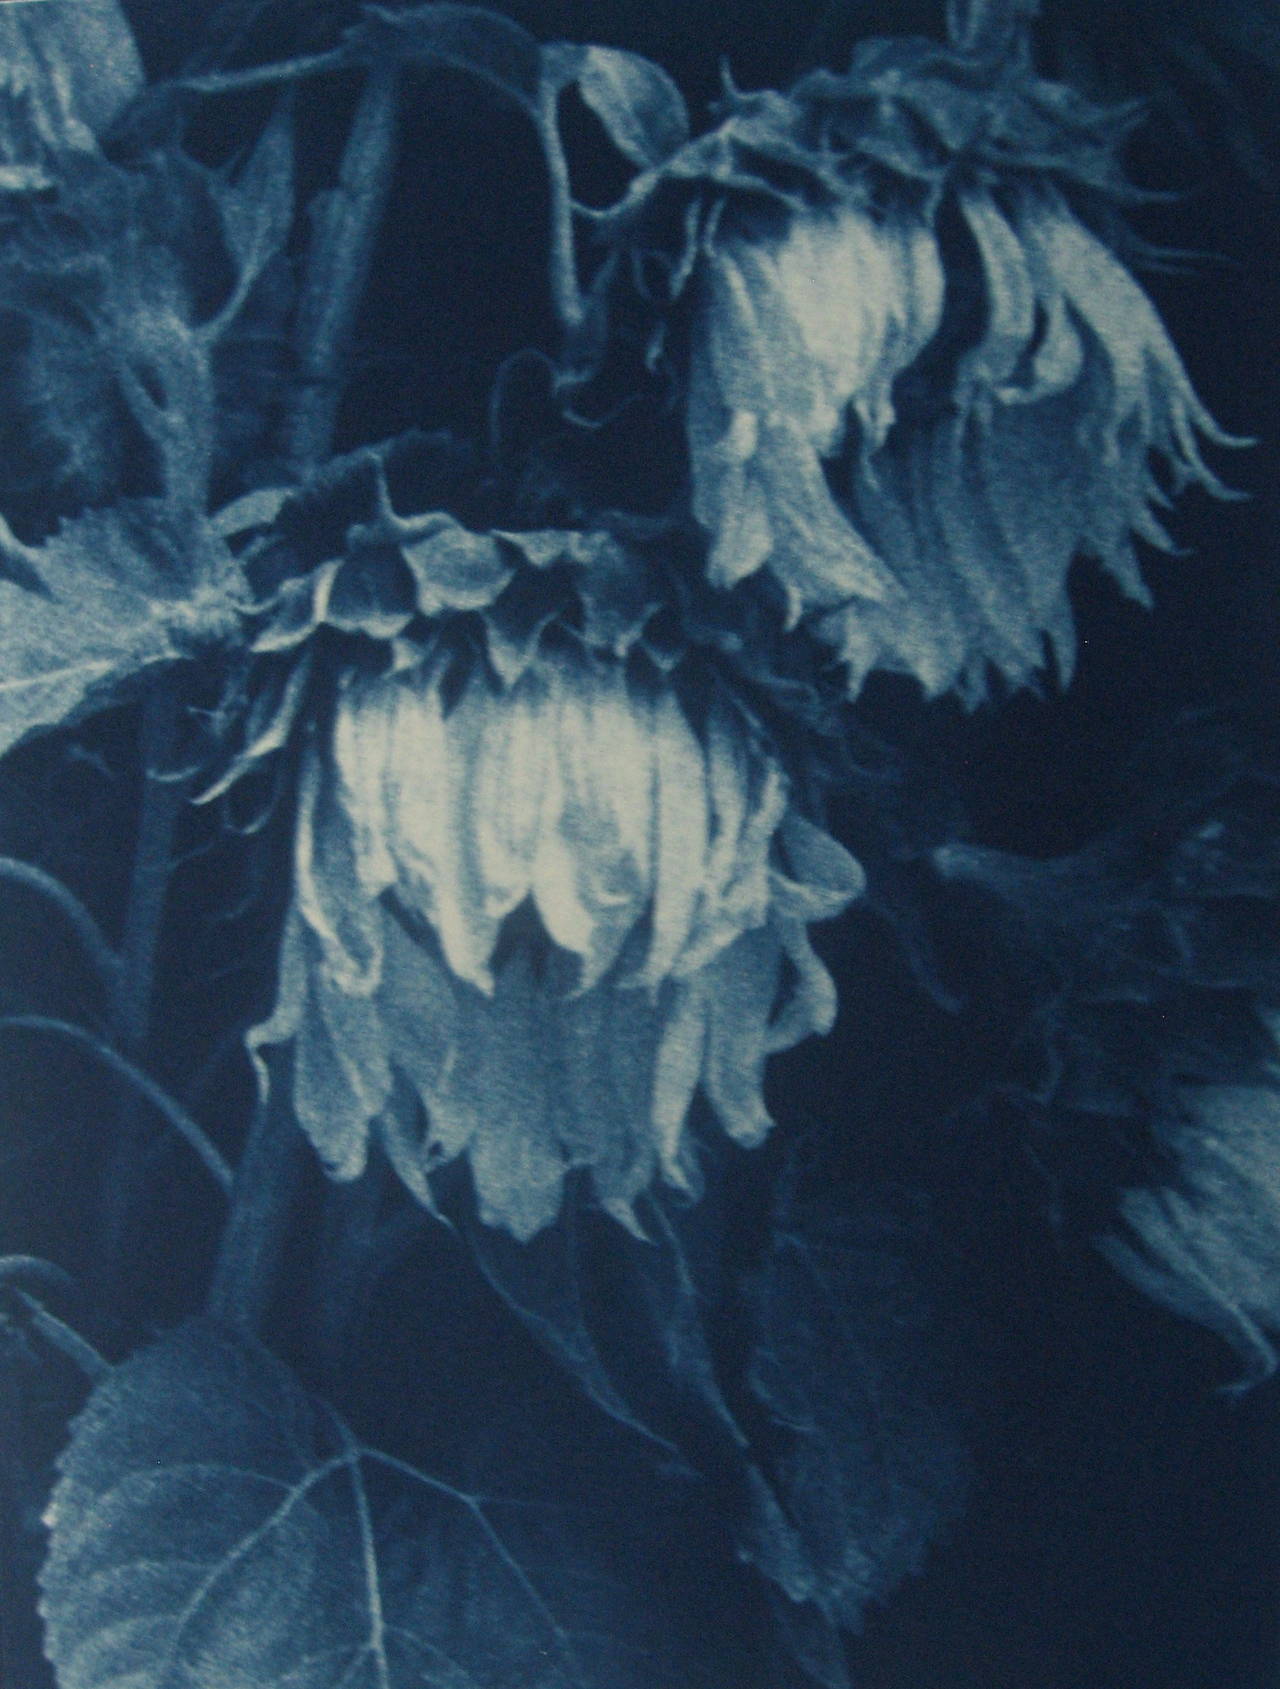 Sunflowers by Jan Van Leeuwen presents two sunflowers, slightly dried and wilted, bathed in a deep saturated blue. 

Sunflowers by Jan Van Leeuwen is a 16 x 12 inch cyanotype print. It is signed and dated with print date, print type, and artist